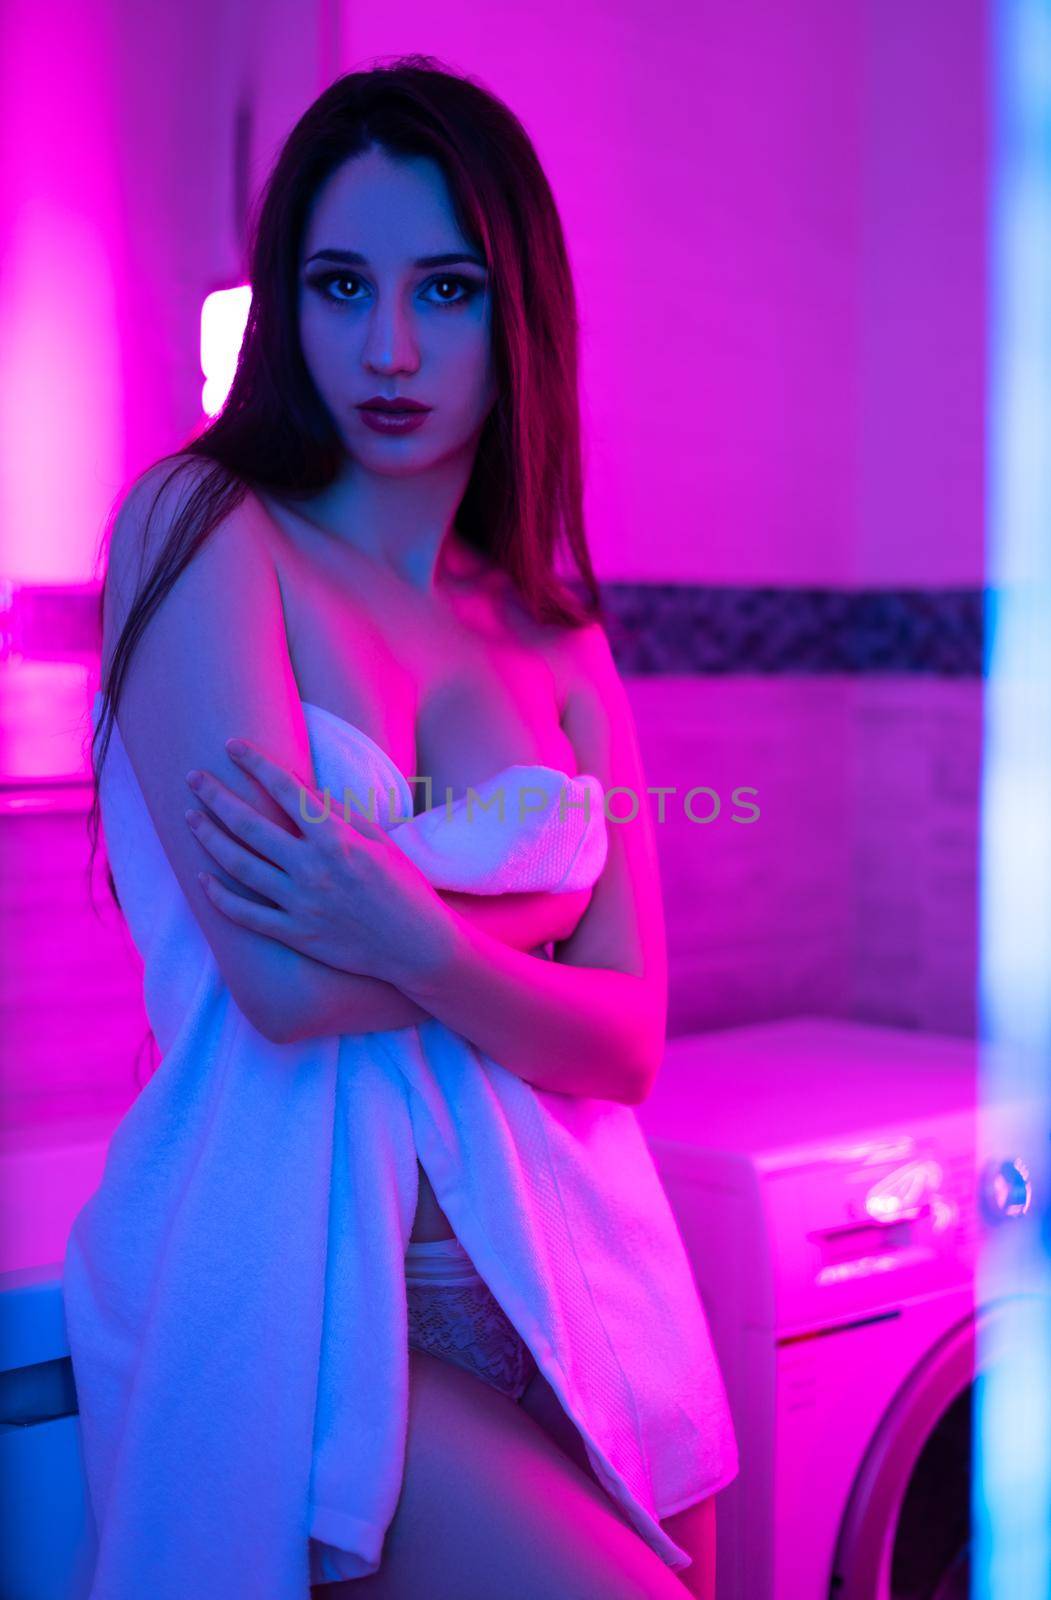 the sexy girl with long hair in a white towel in the bathroom with neon light